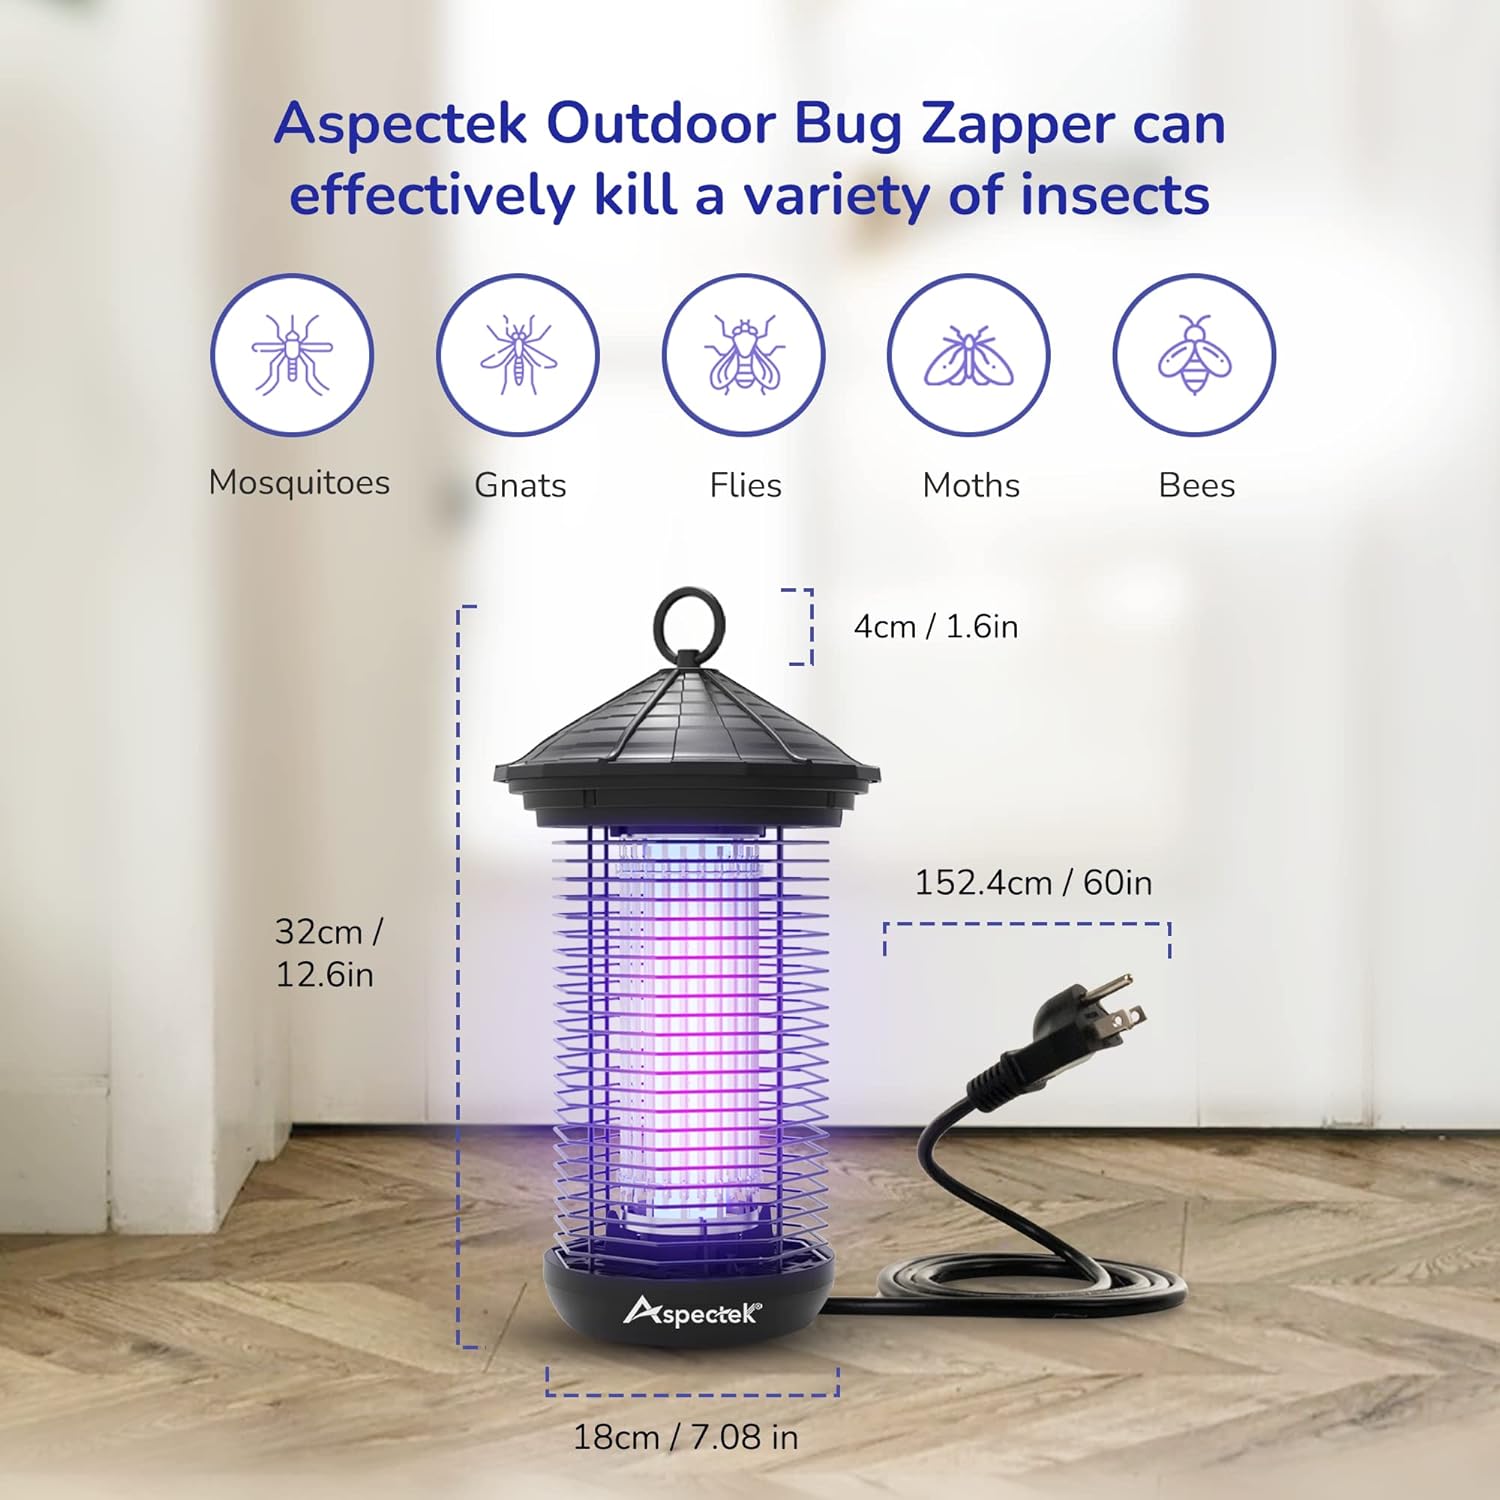 https://bigbigmart.com/wp-content/uploads/2023/10/ASPECTEK-Bug-Zapper-Outdoor-20W-Electric-Mosquito-Zapper-Insect-Fly-Zapper-Effective-UV-Light-Fly-Killer-for-Outdoor-use-Waterproof-Up-to-1000sq.-FT-Coverage-for-Camping-Patio-Garden-BBQ2.jpg